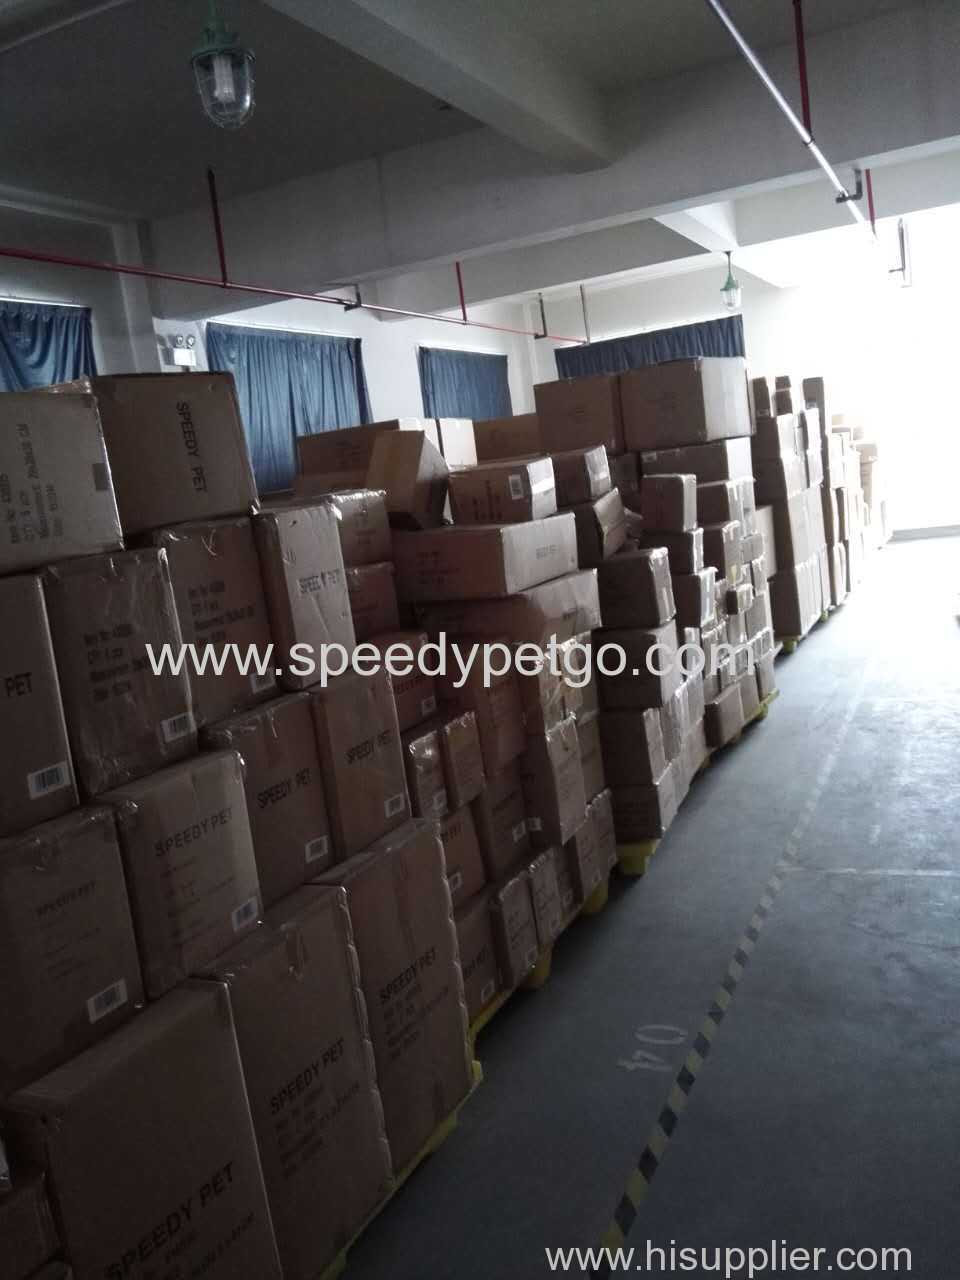 The Israel customer goods ready for Shipping